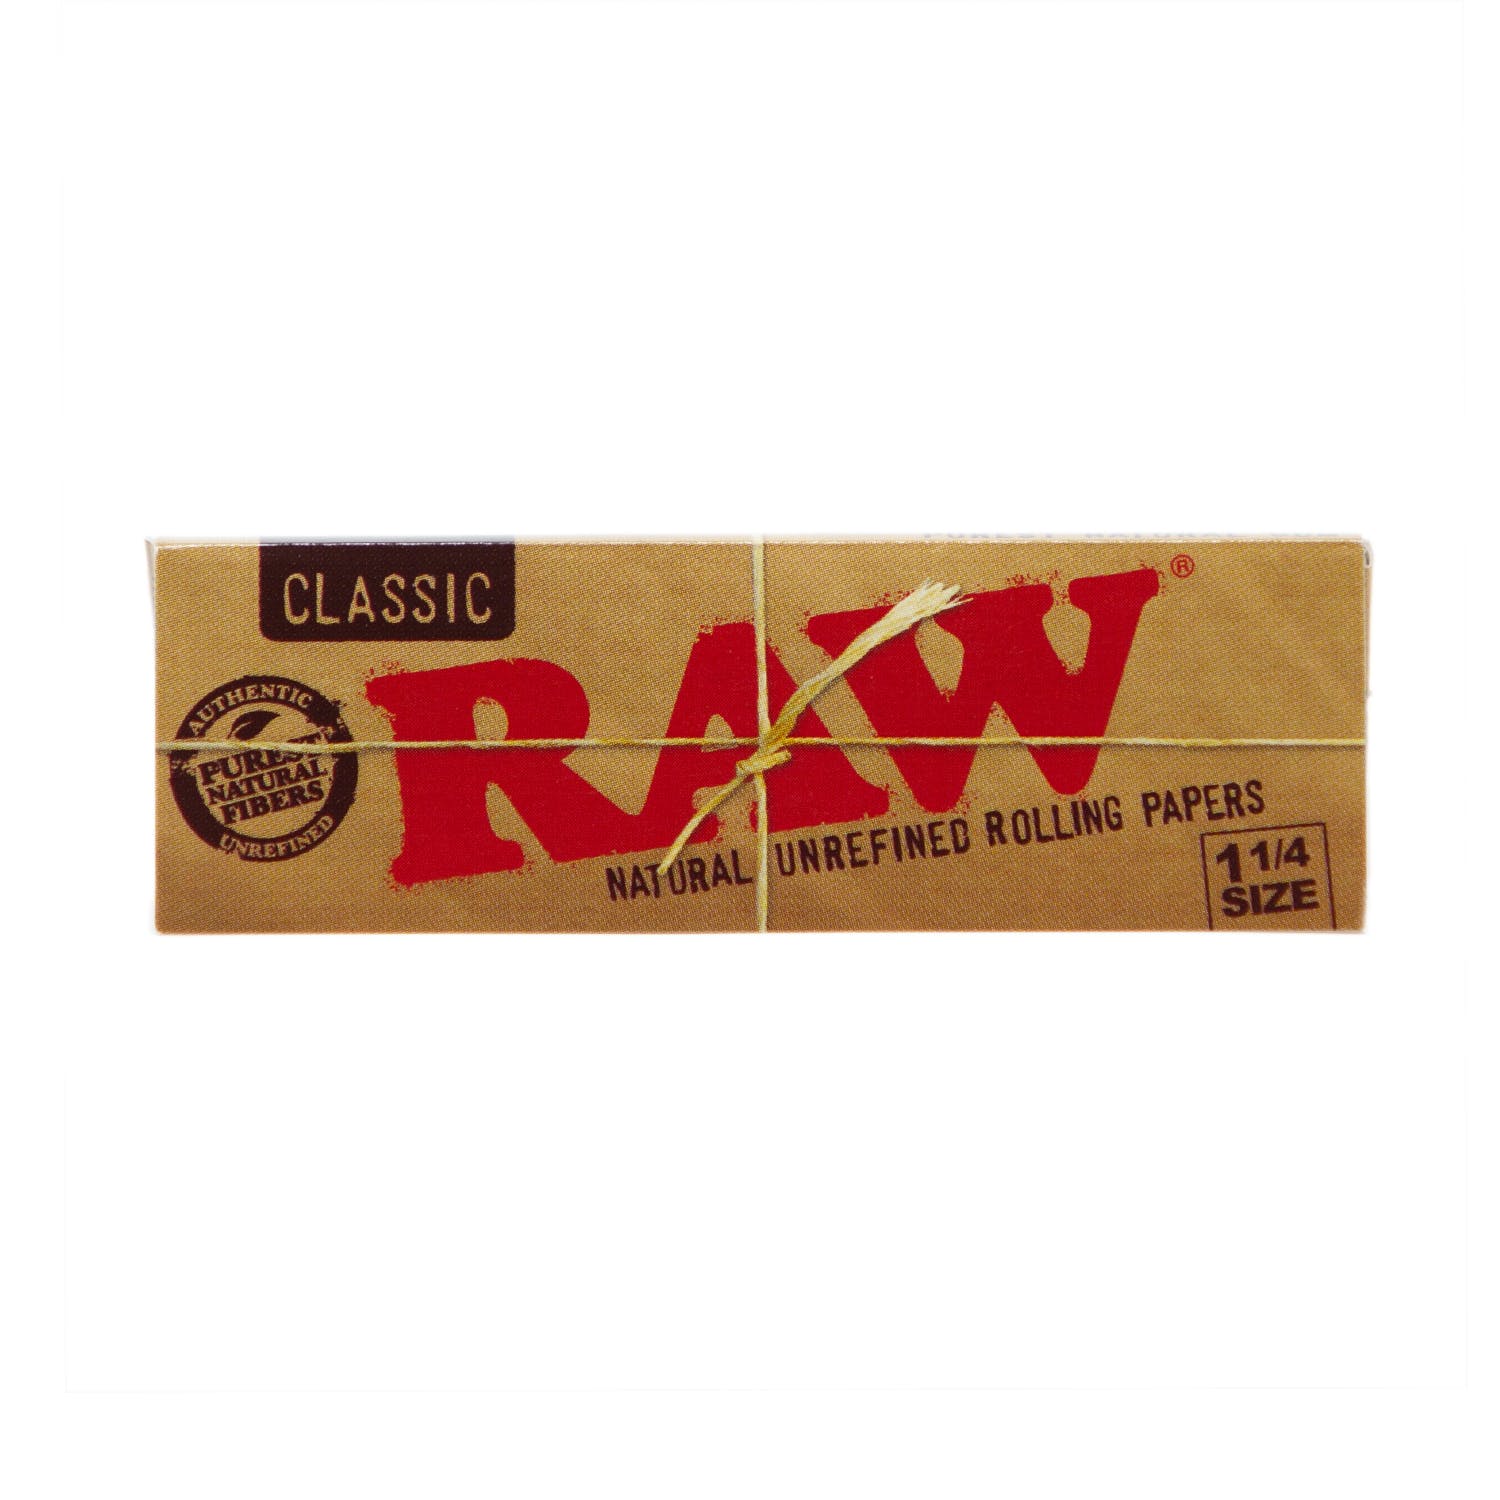 RAW CLASSIC 1-1/4 SIZE PAPERS